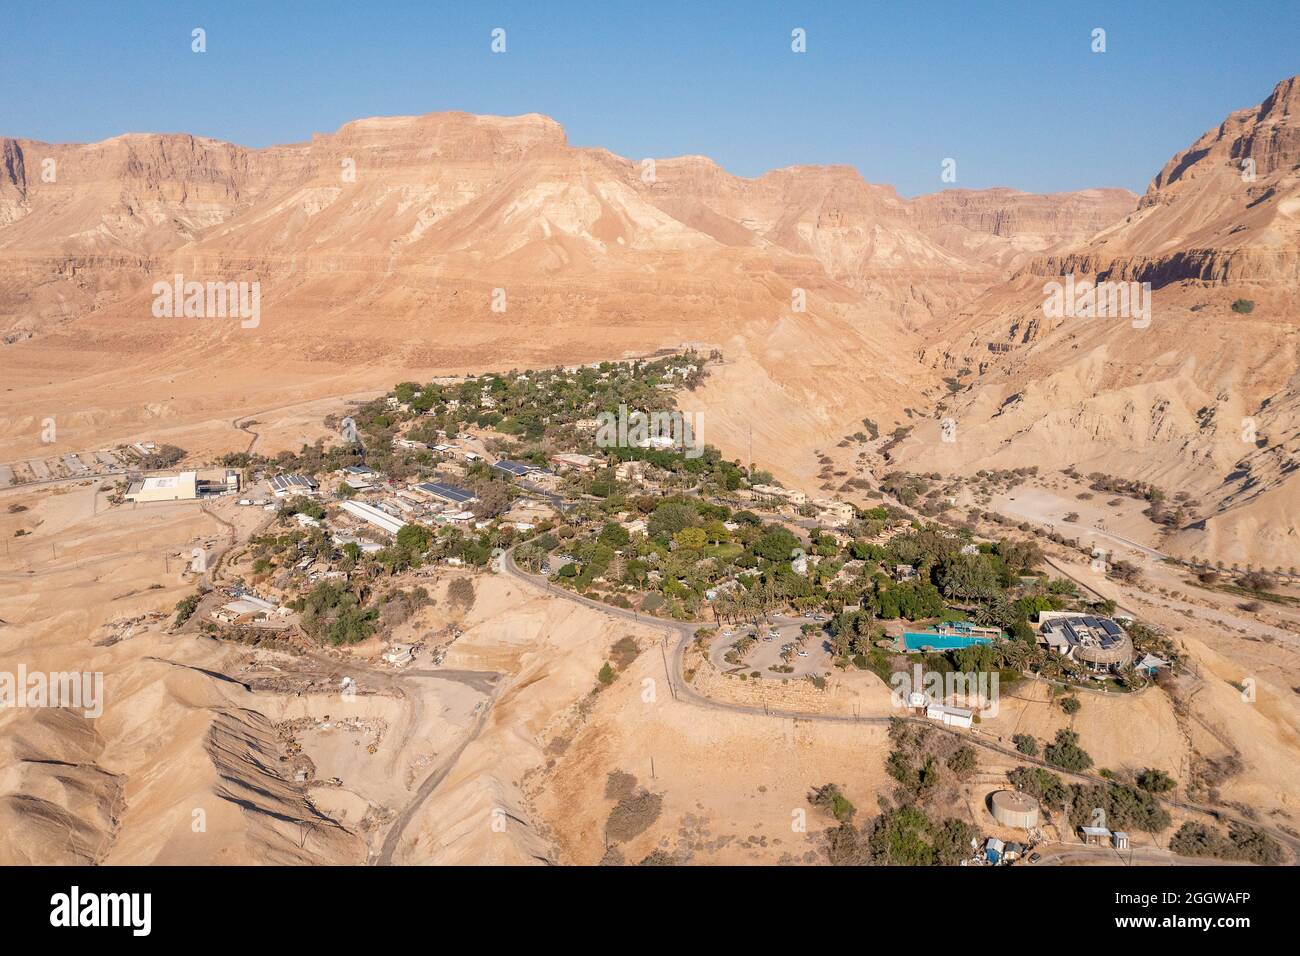 Aerial view of Kibbutz Ein Gedi oasis and nature reserve. Stock Photo